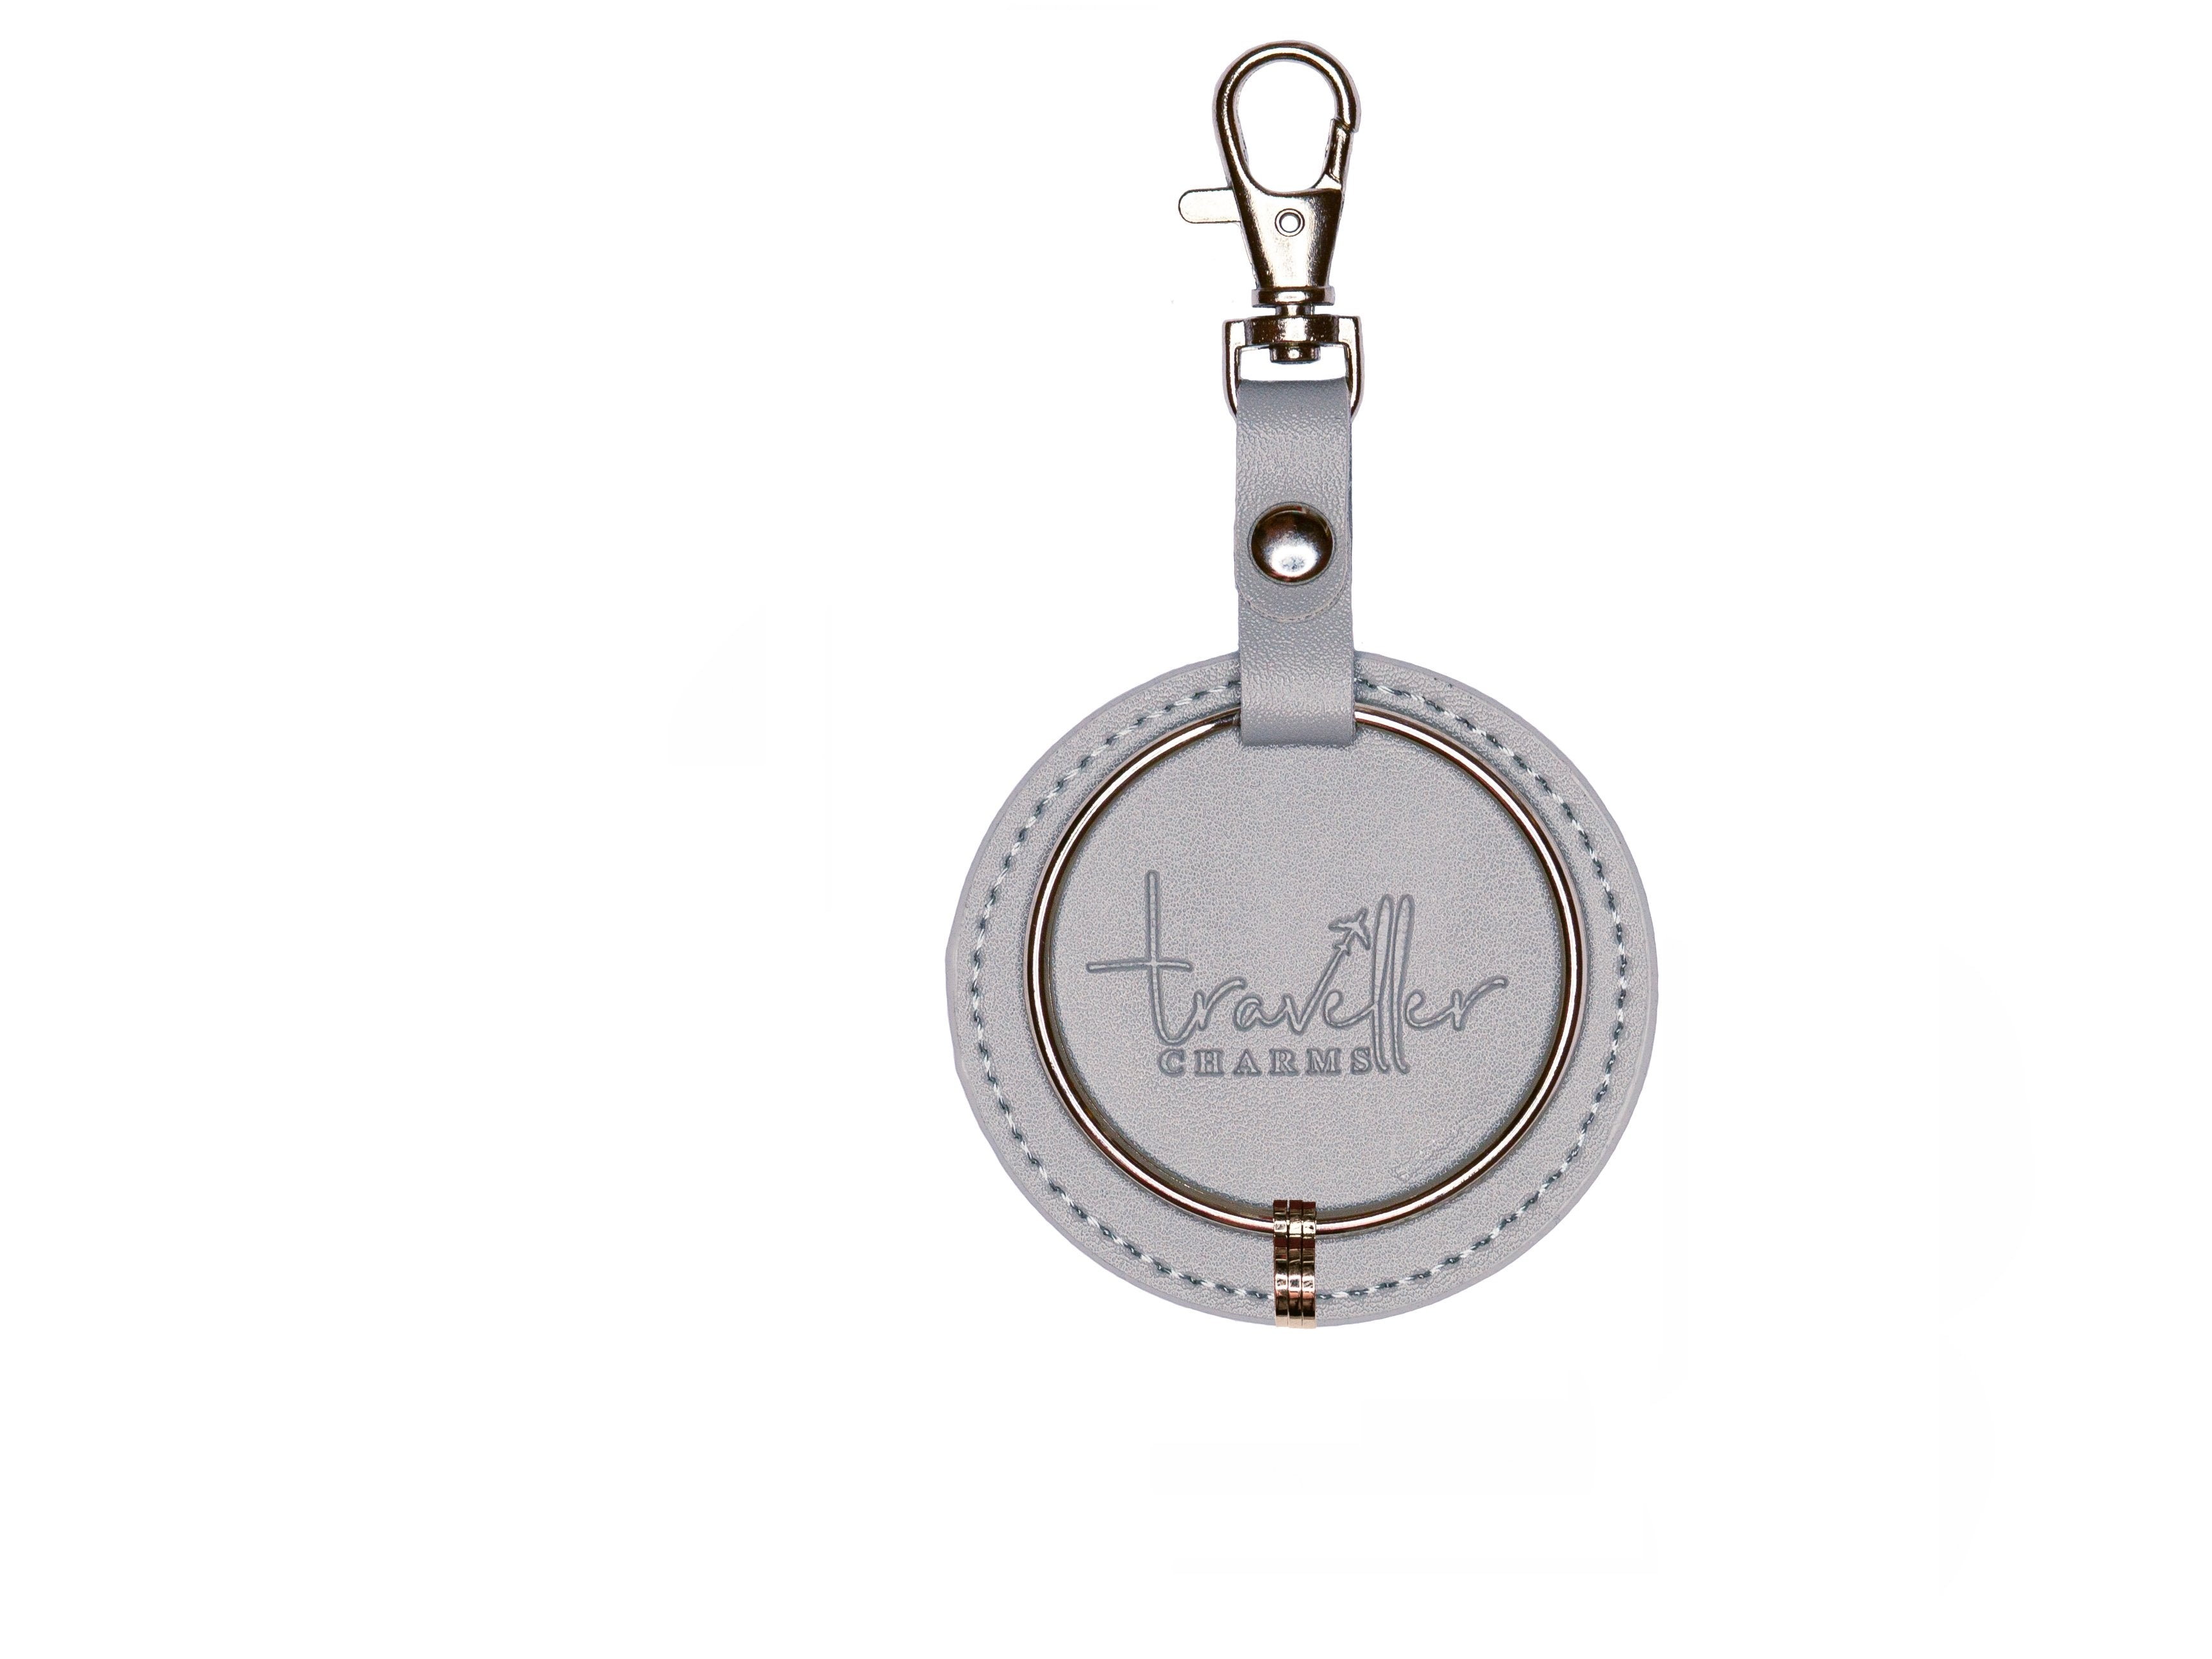 SILVER Gift Set - Key Chain & 3 Engraved Travel Charms - Traveller Charms